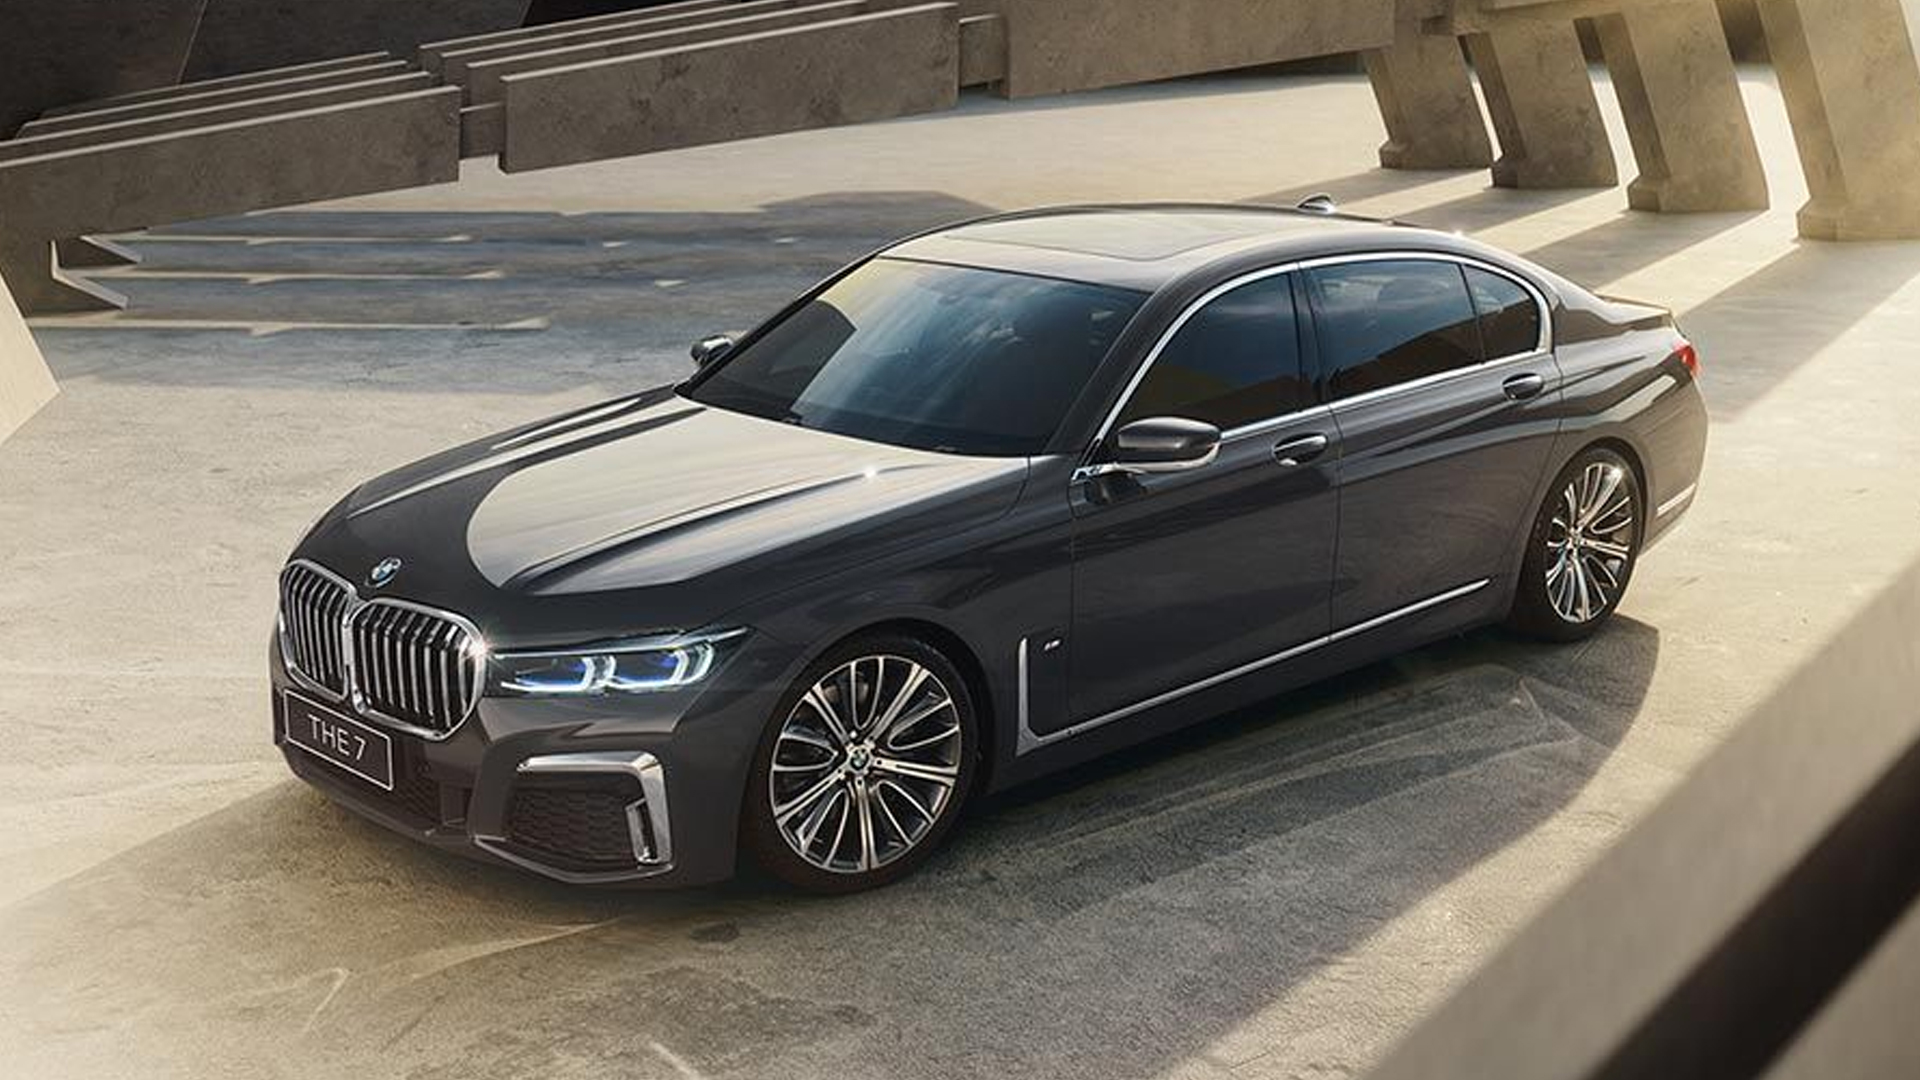 BMW 7 Series 2021 - Price in India, Mileage, Reviews, Colours,  Specification, Images - Overdrive